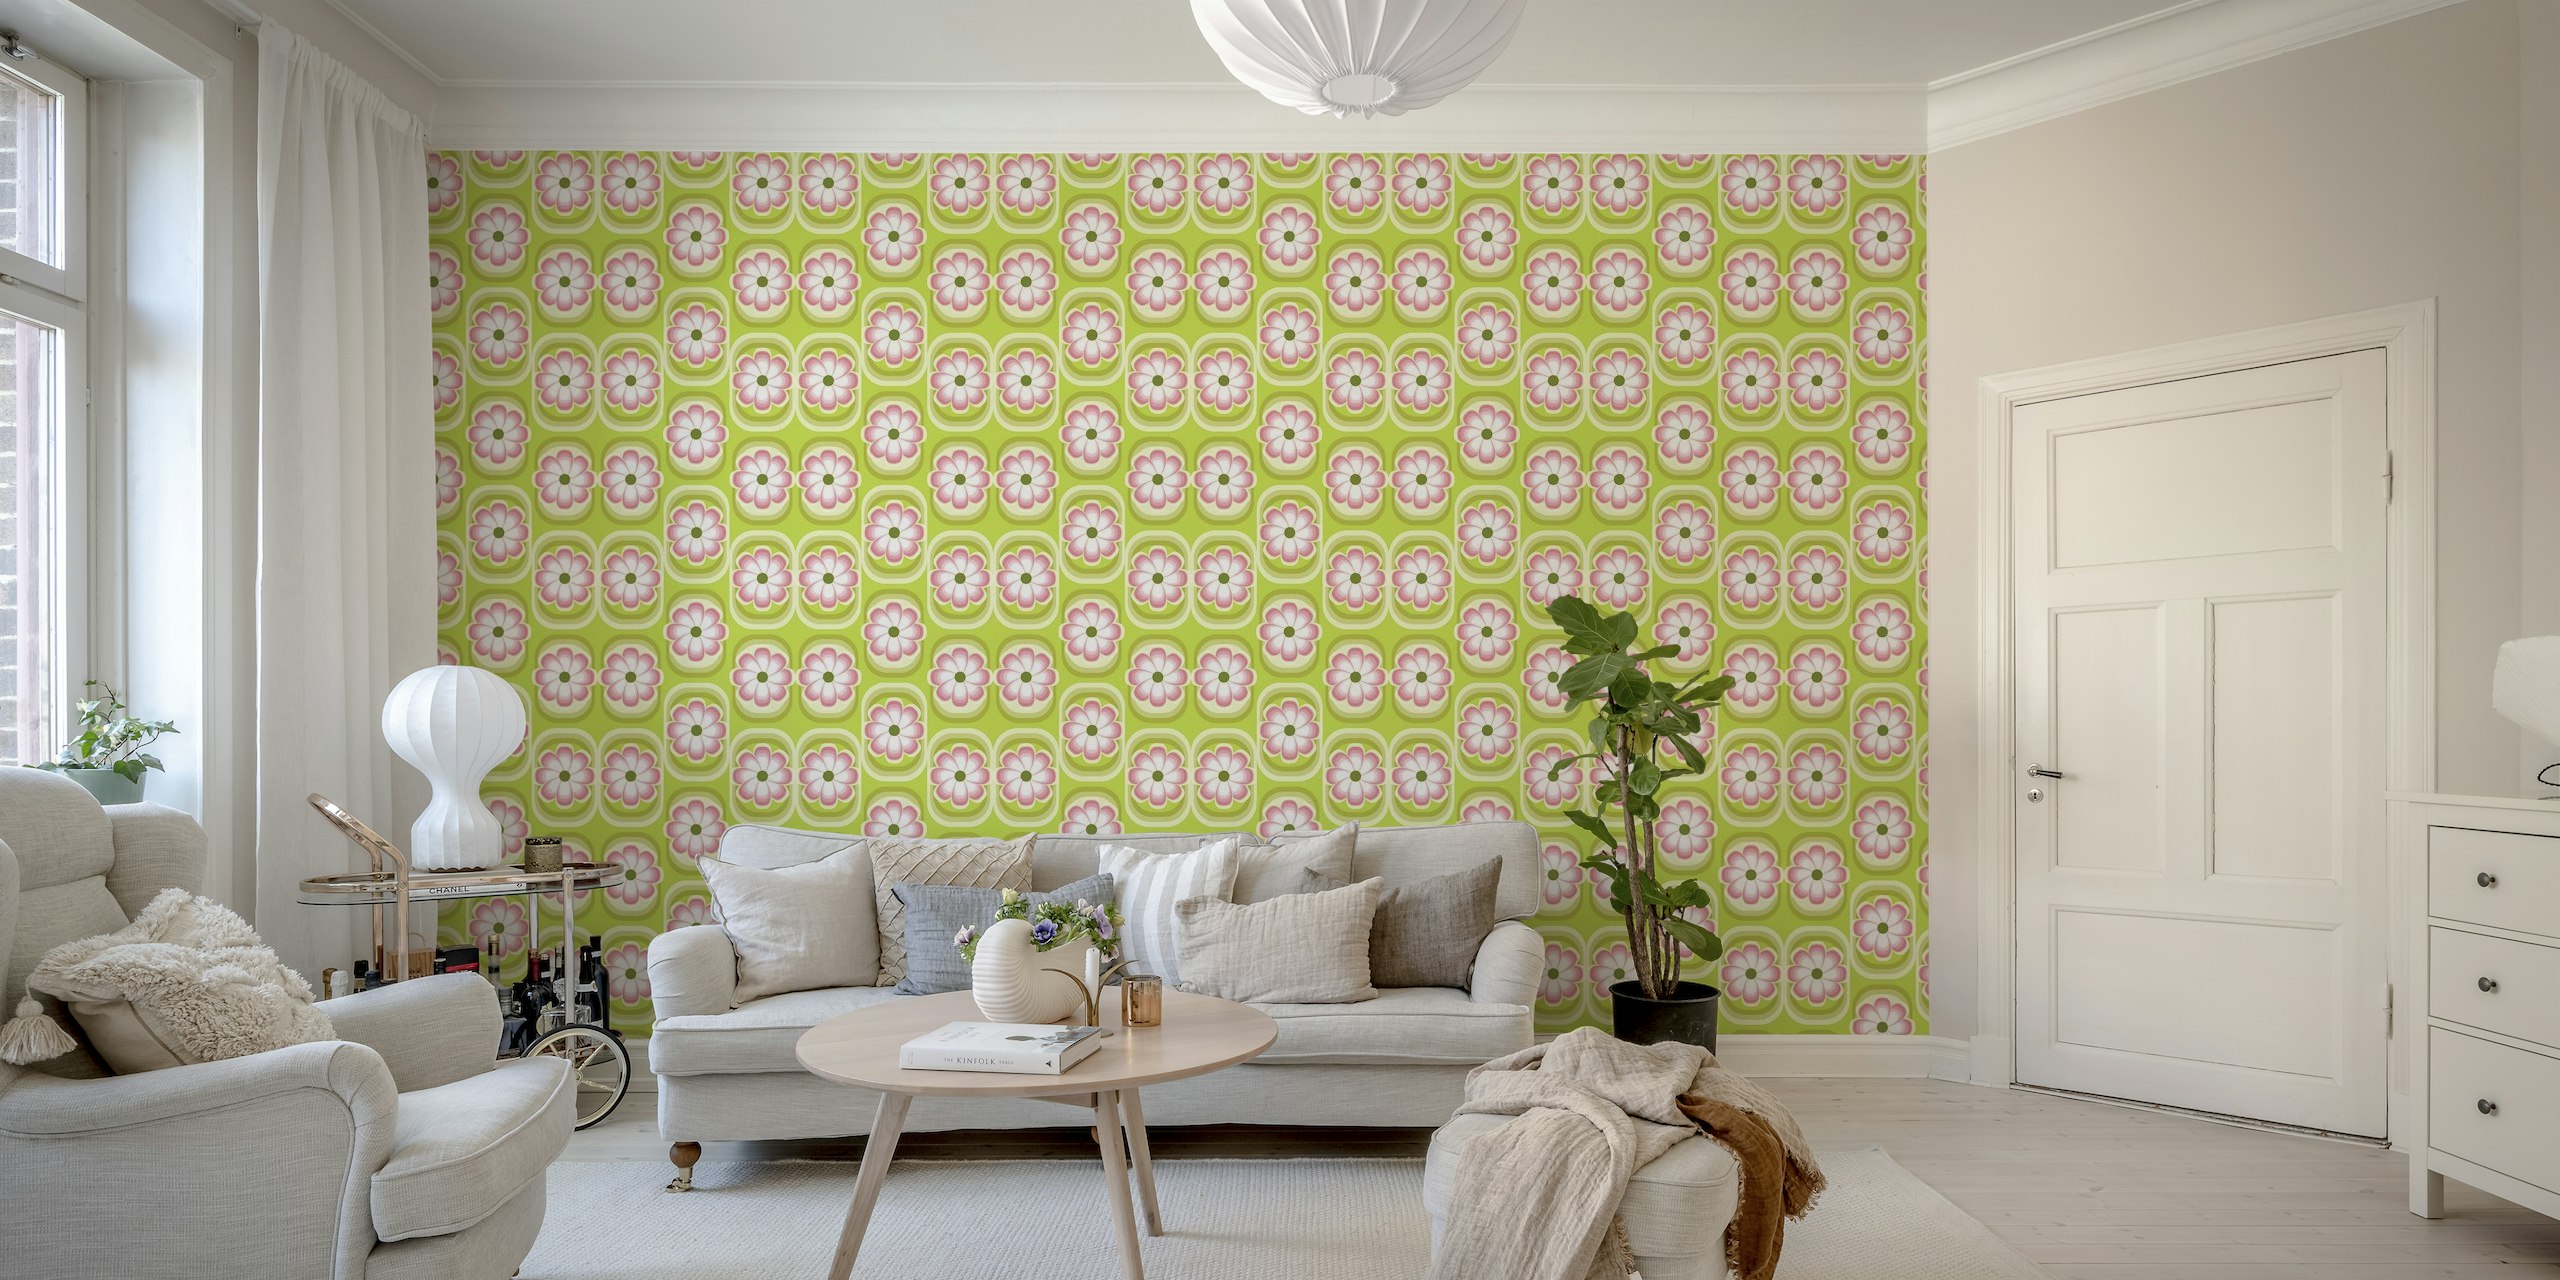 Retro Groovy flowers in lime green and pink papel pintado